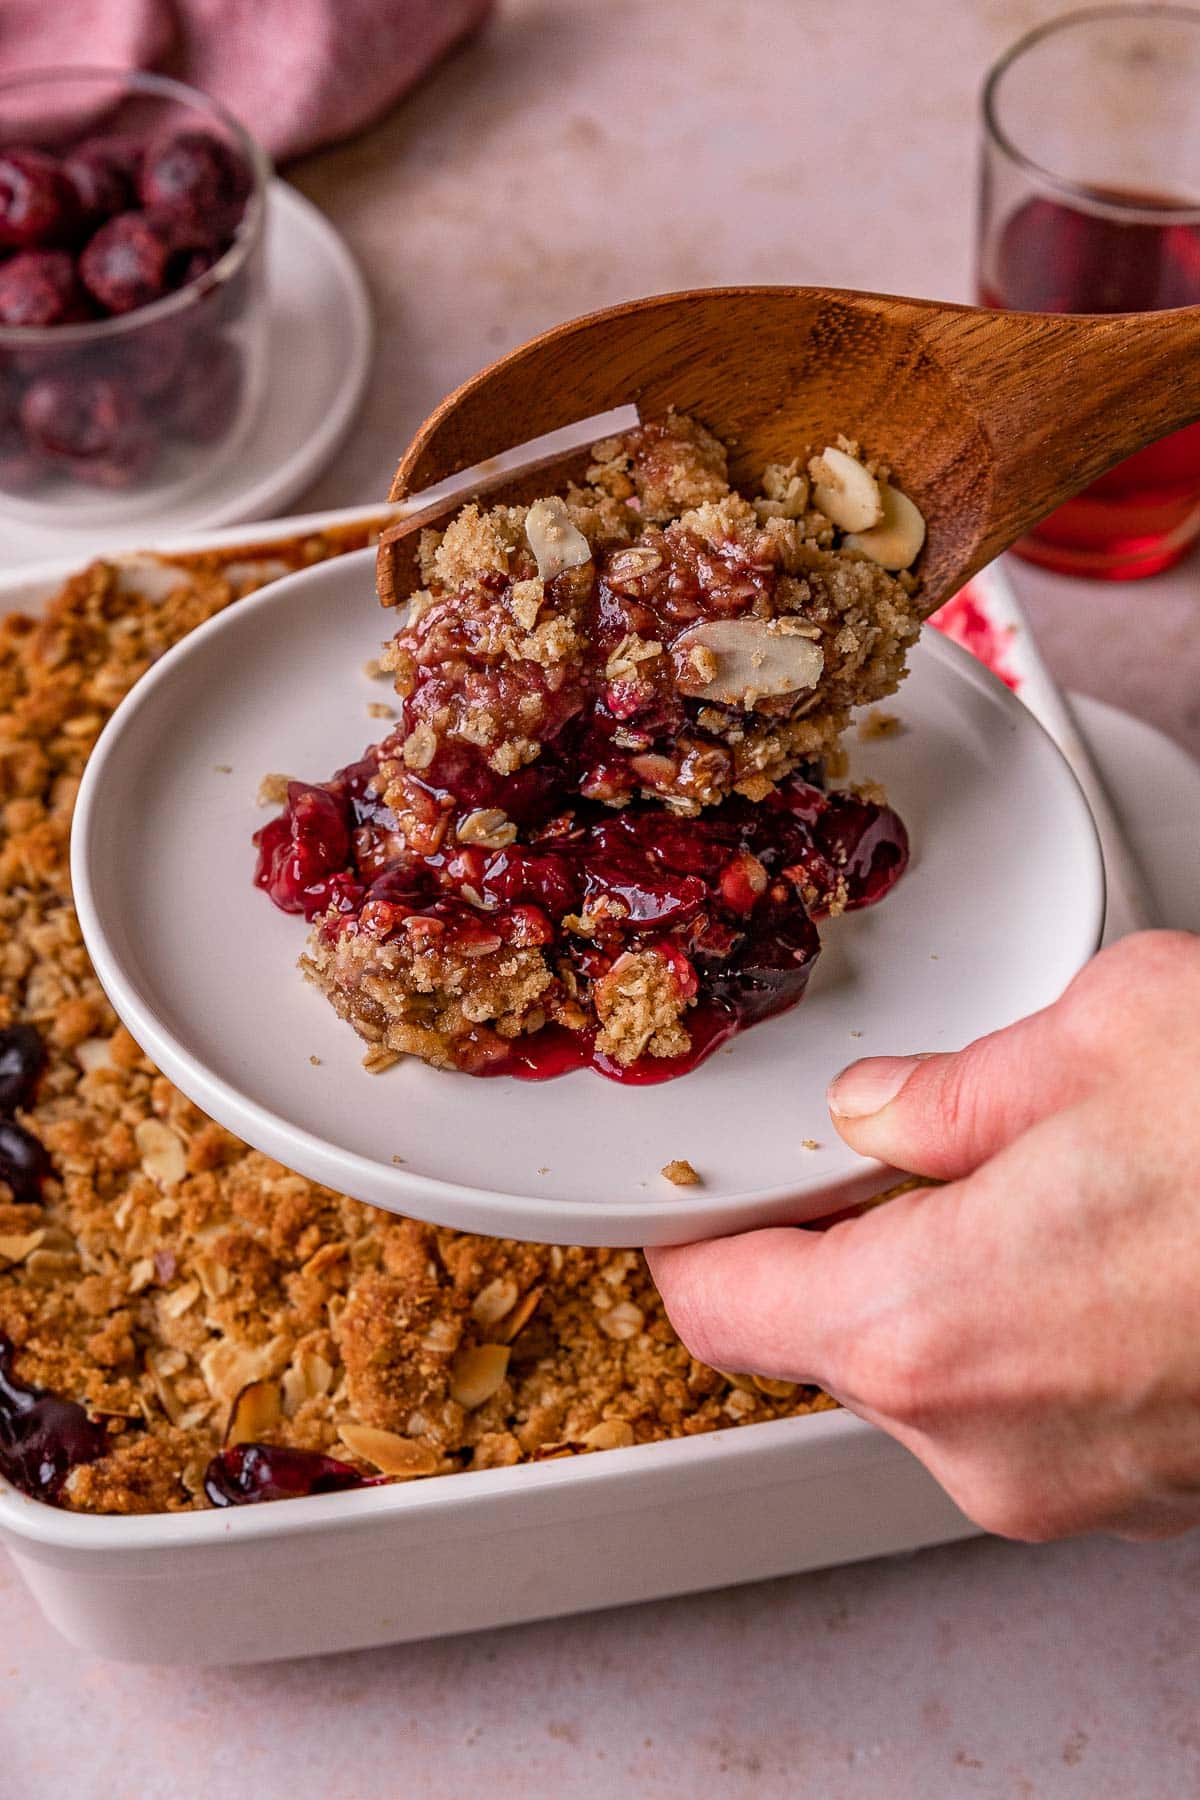 Cherry Crisp prepared in baking dish and scooping out portion onto plate with wooden spoon